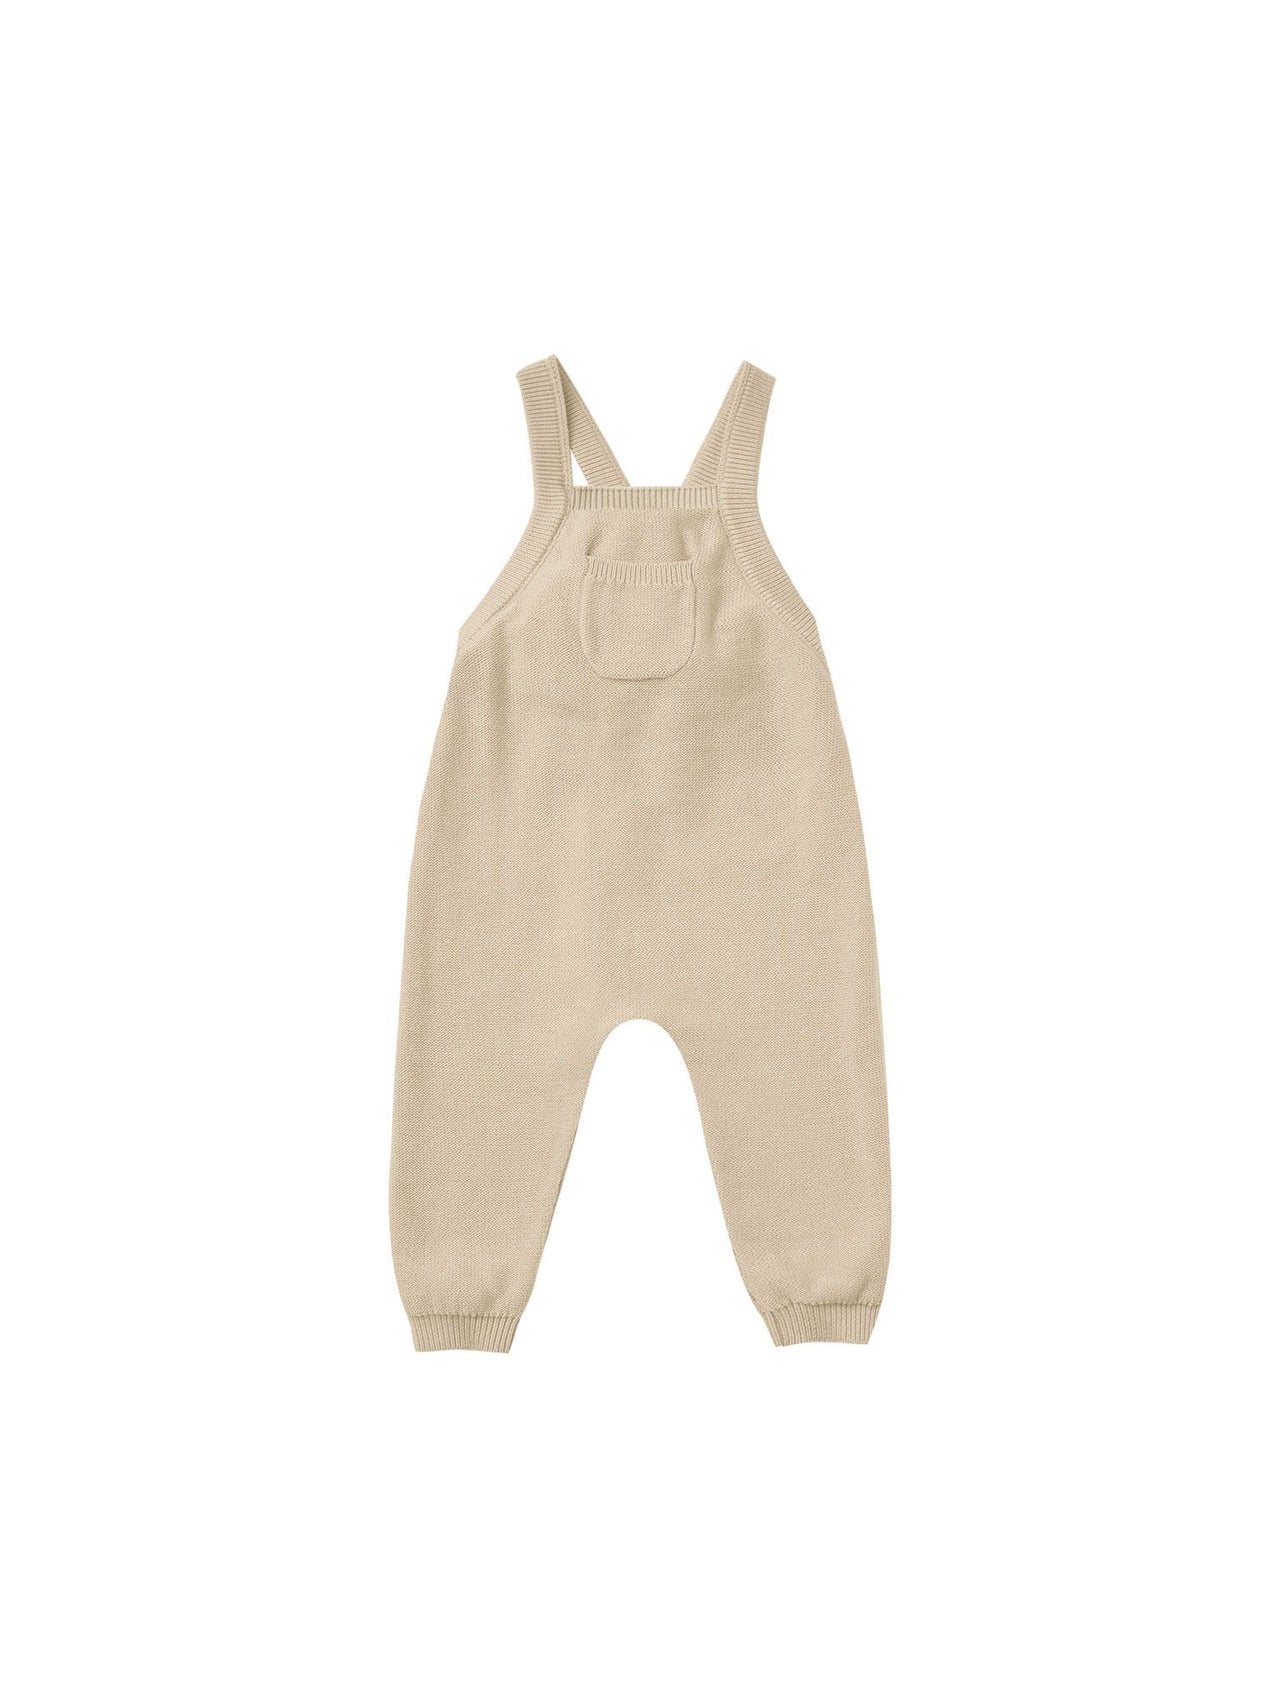 Quincy Mae Organic Knit Overalls, Sand